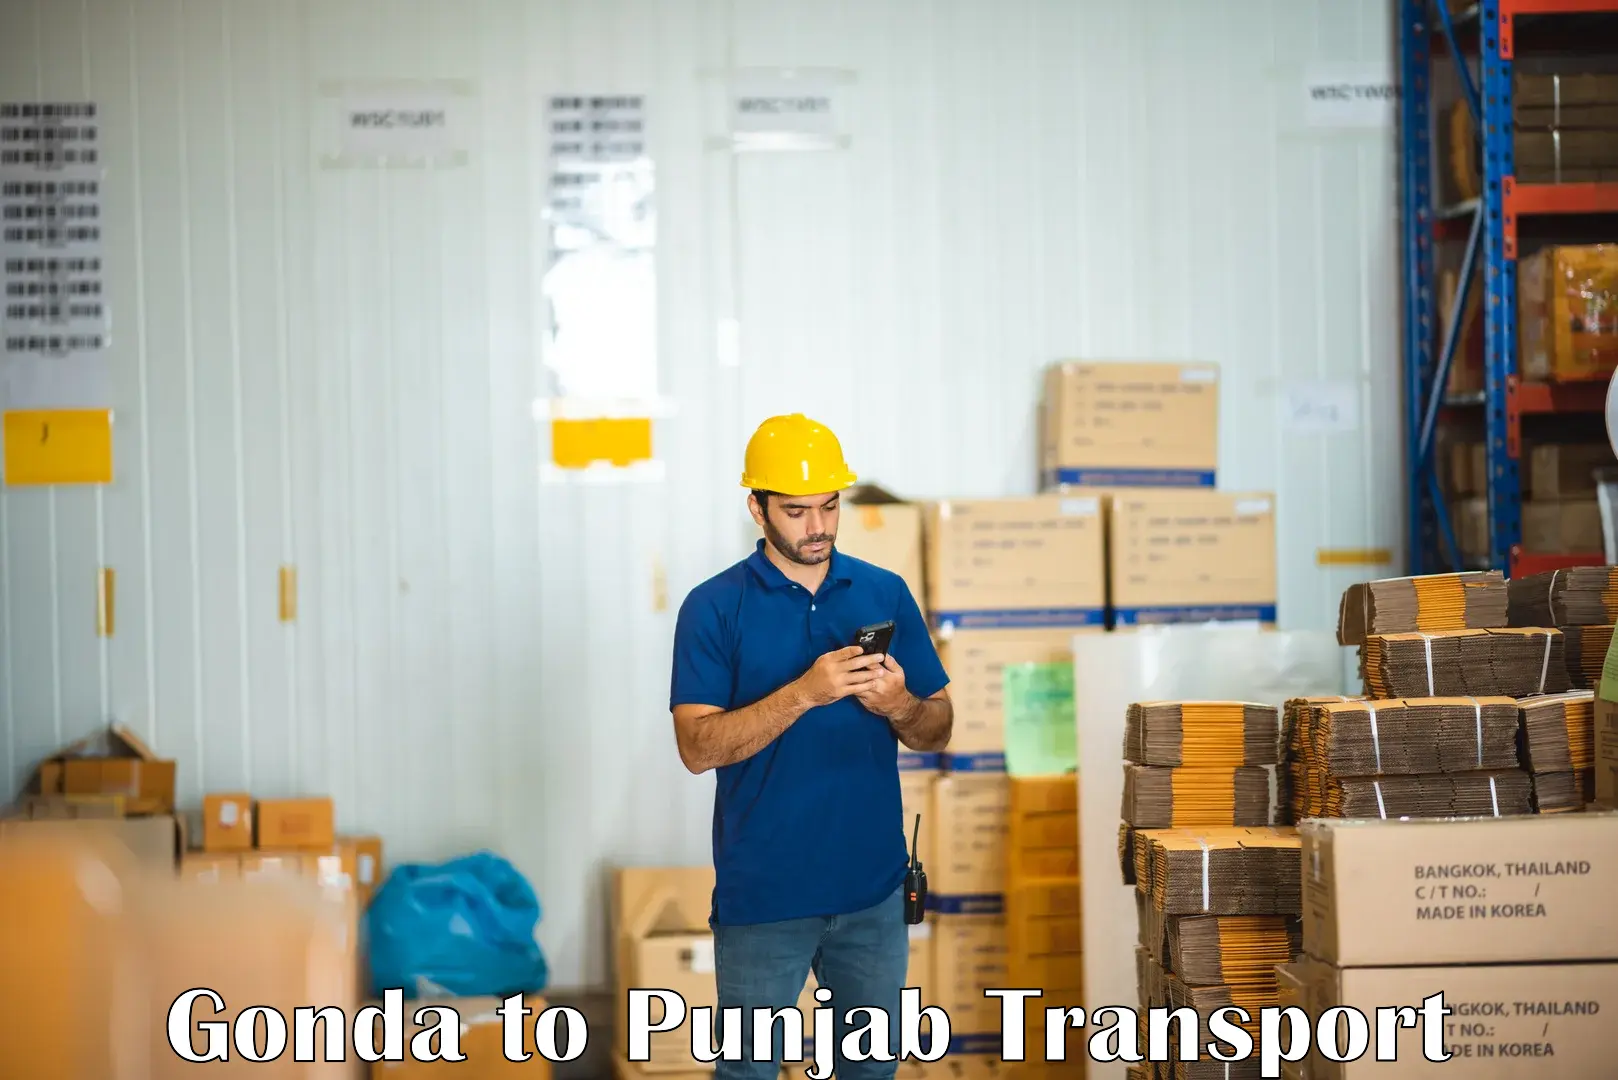 Transport shared services Gonda to Patiala